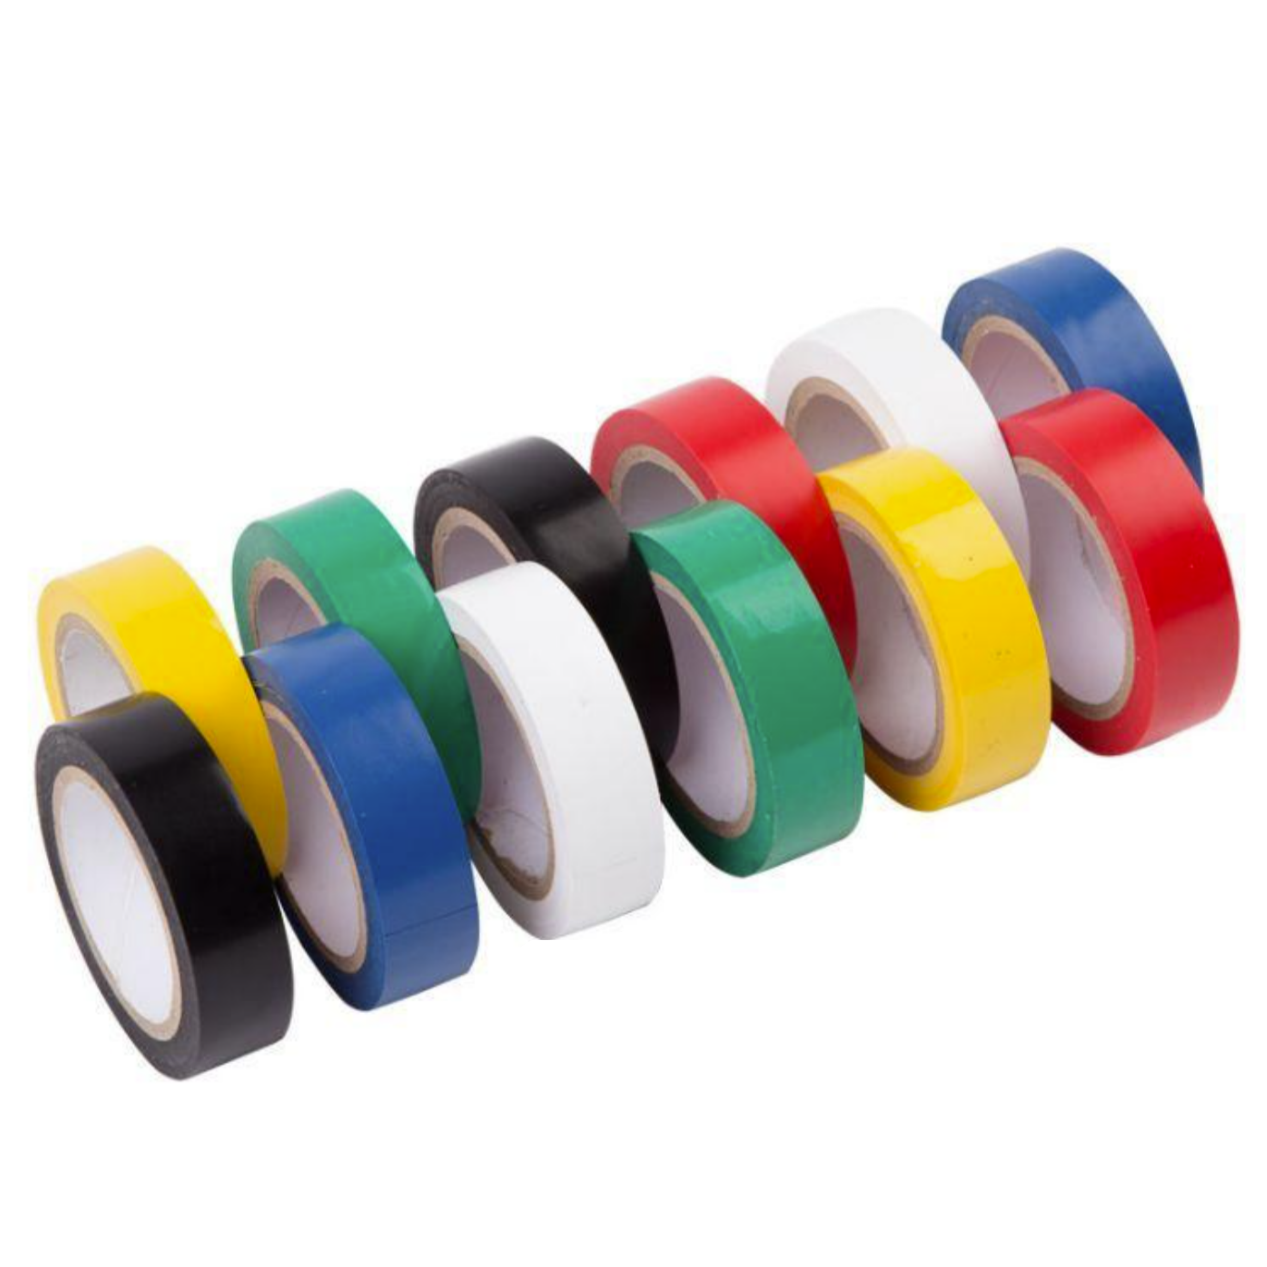 What kind of materials are used in electrical tape?